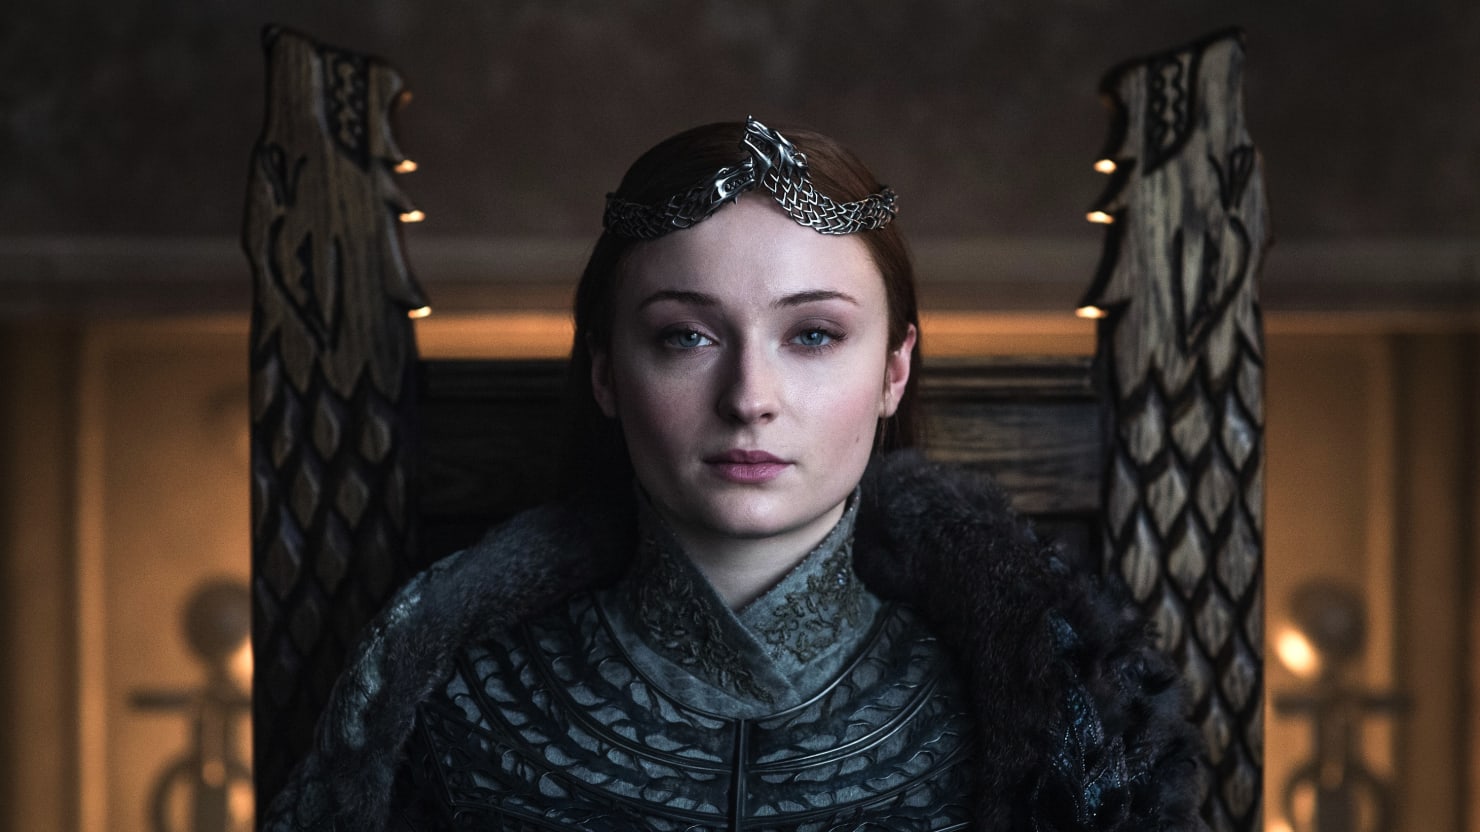 Game of Thrones' Series Finale Ending, Explained: “The Iron Throne